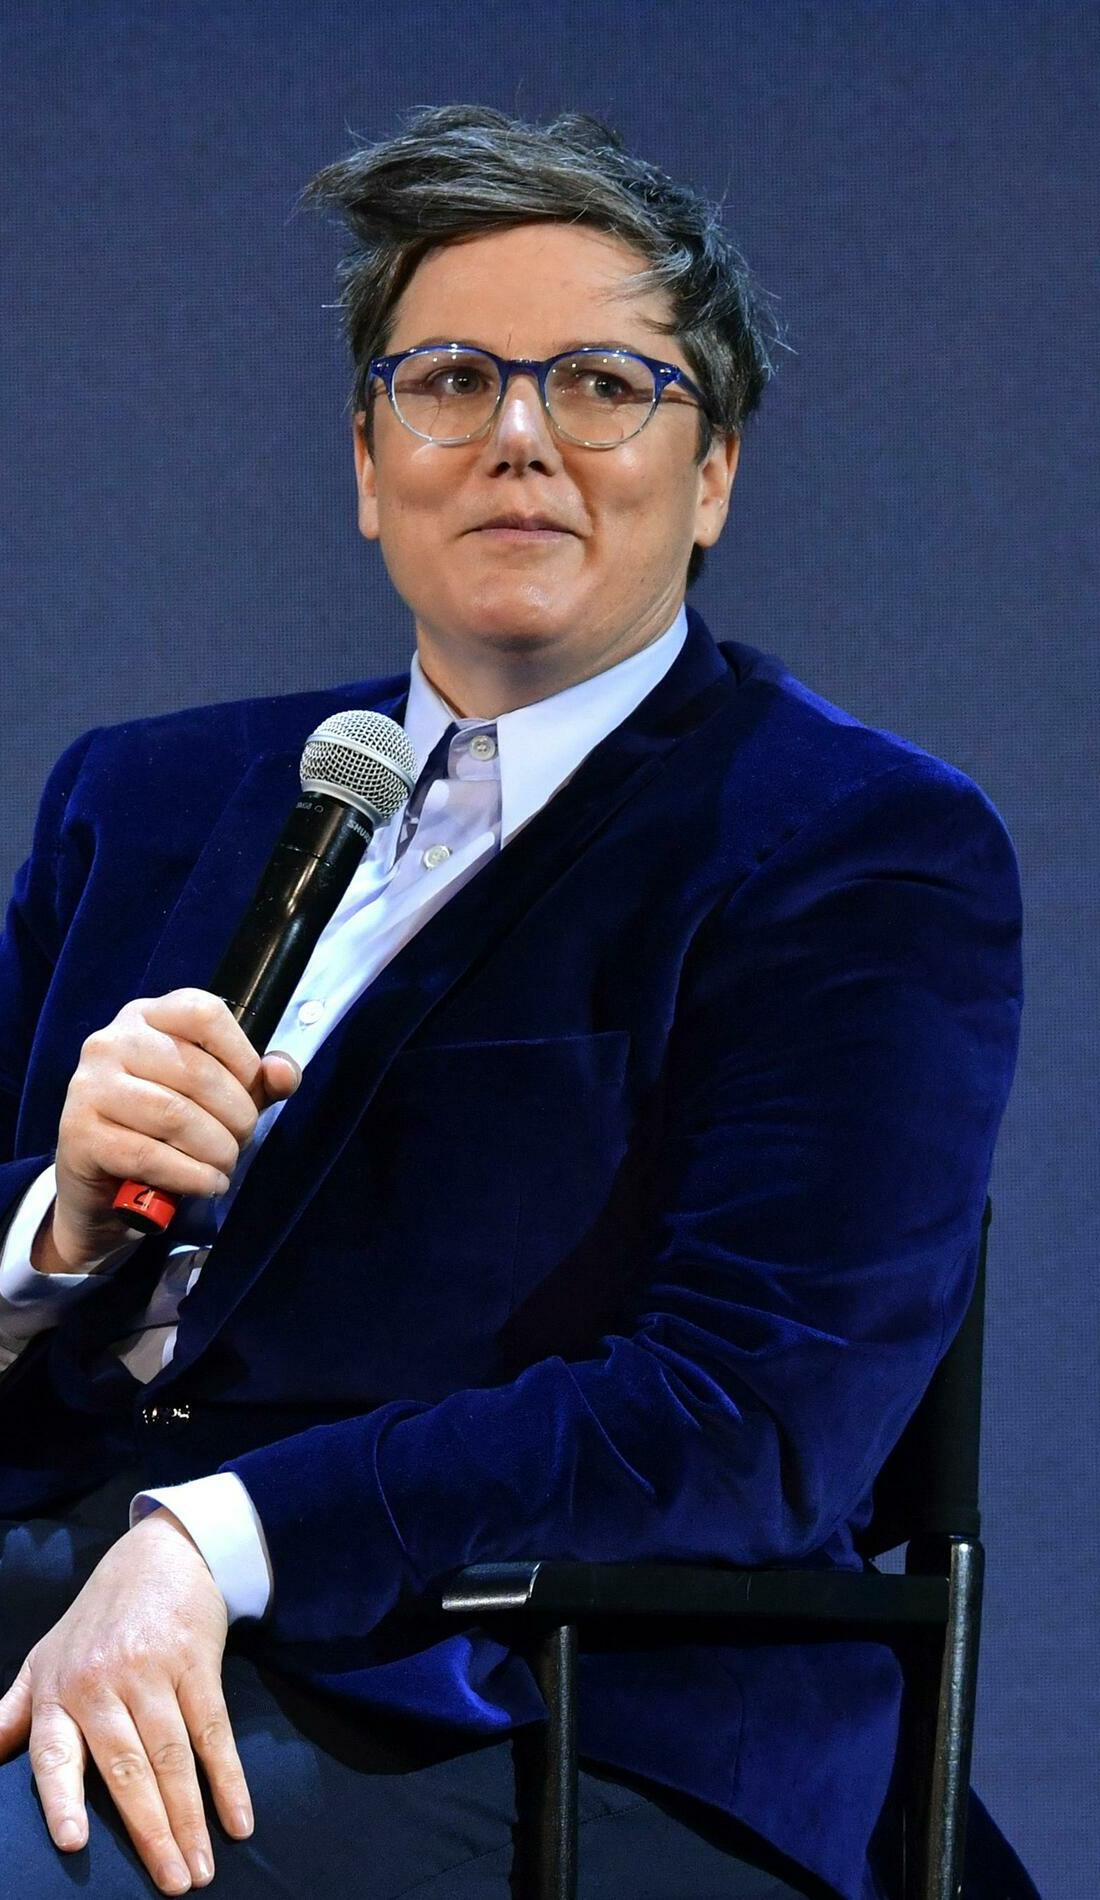 A Hannah Gadsby live event